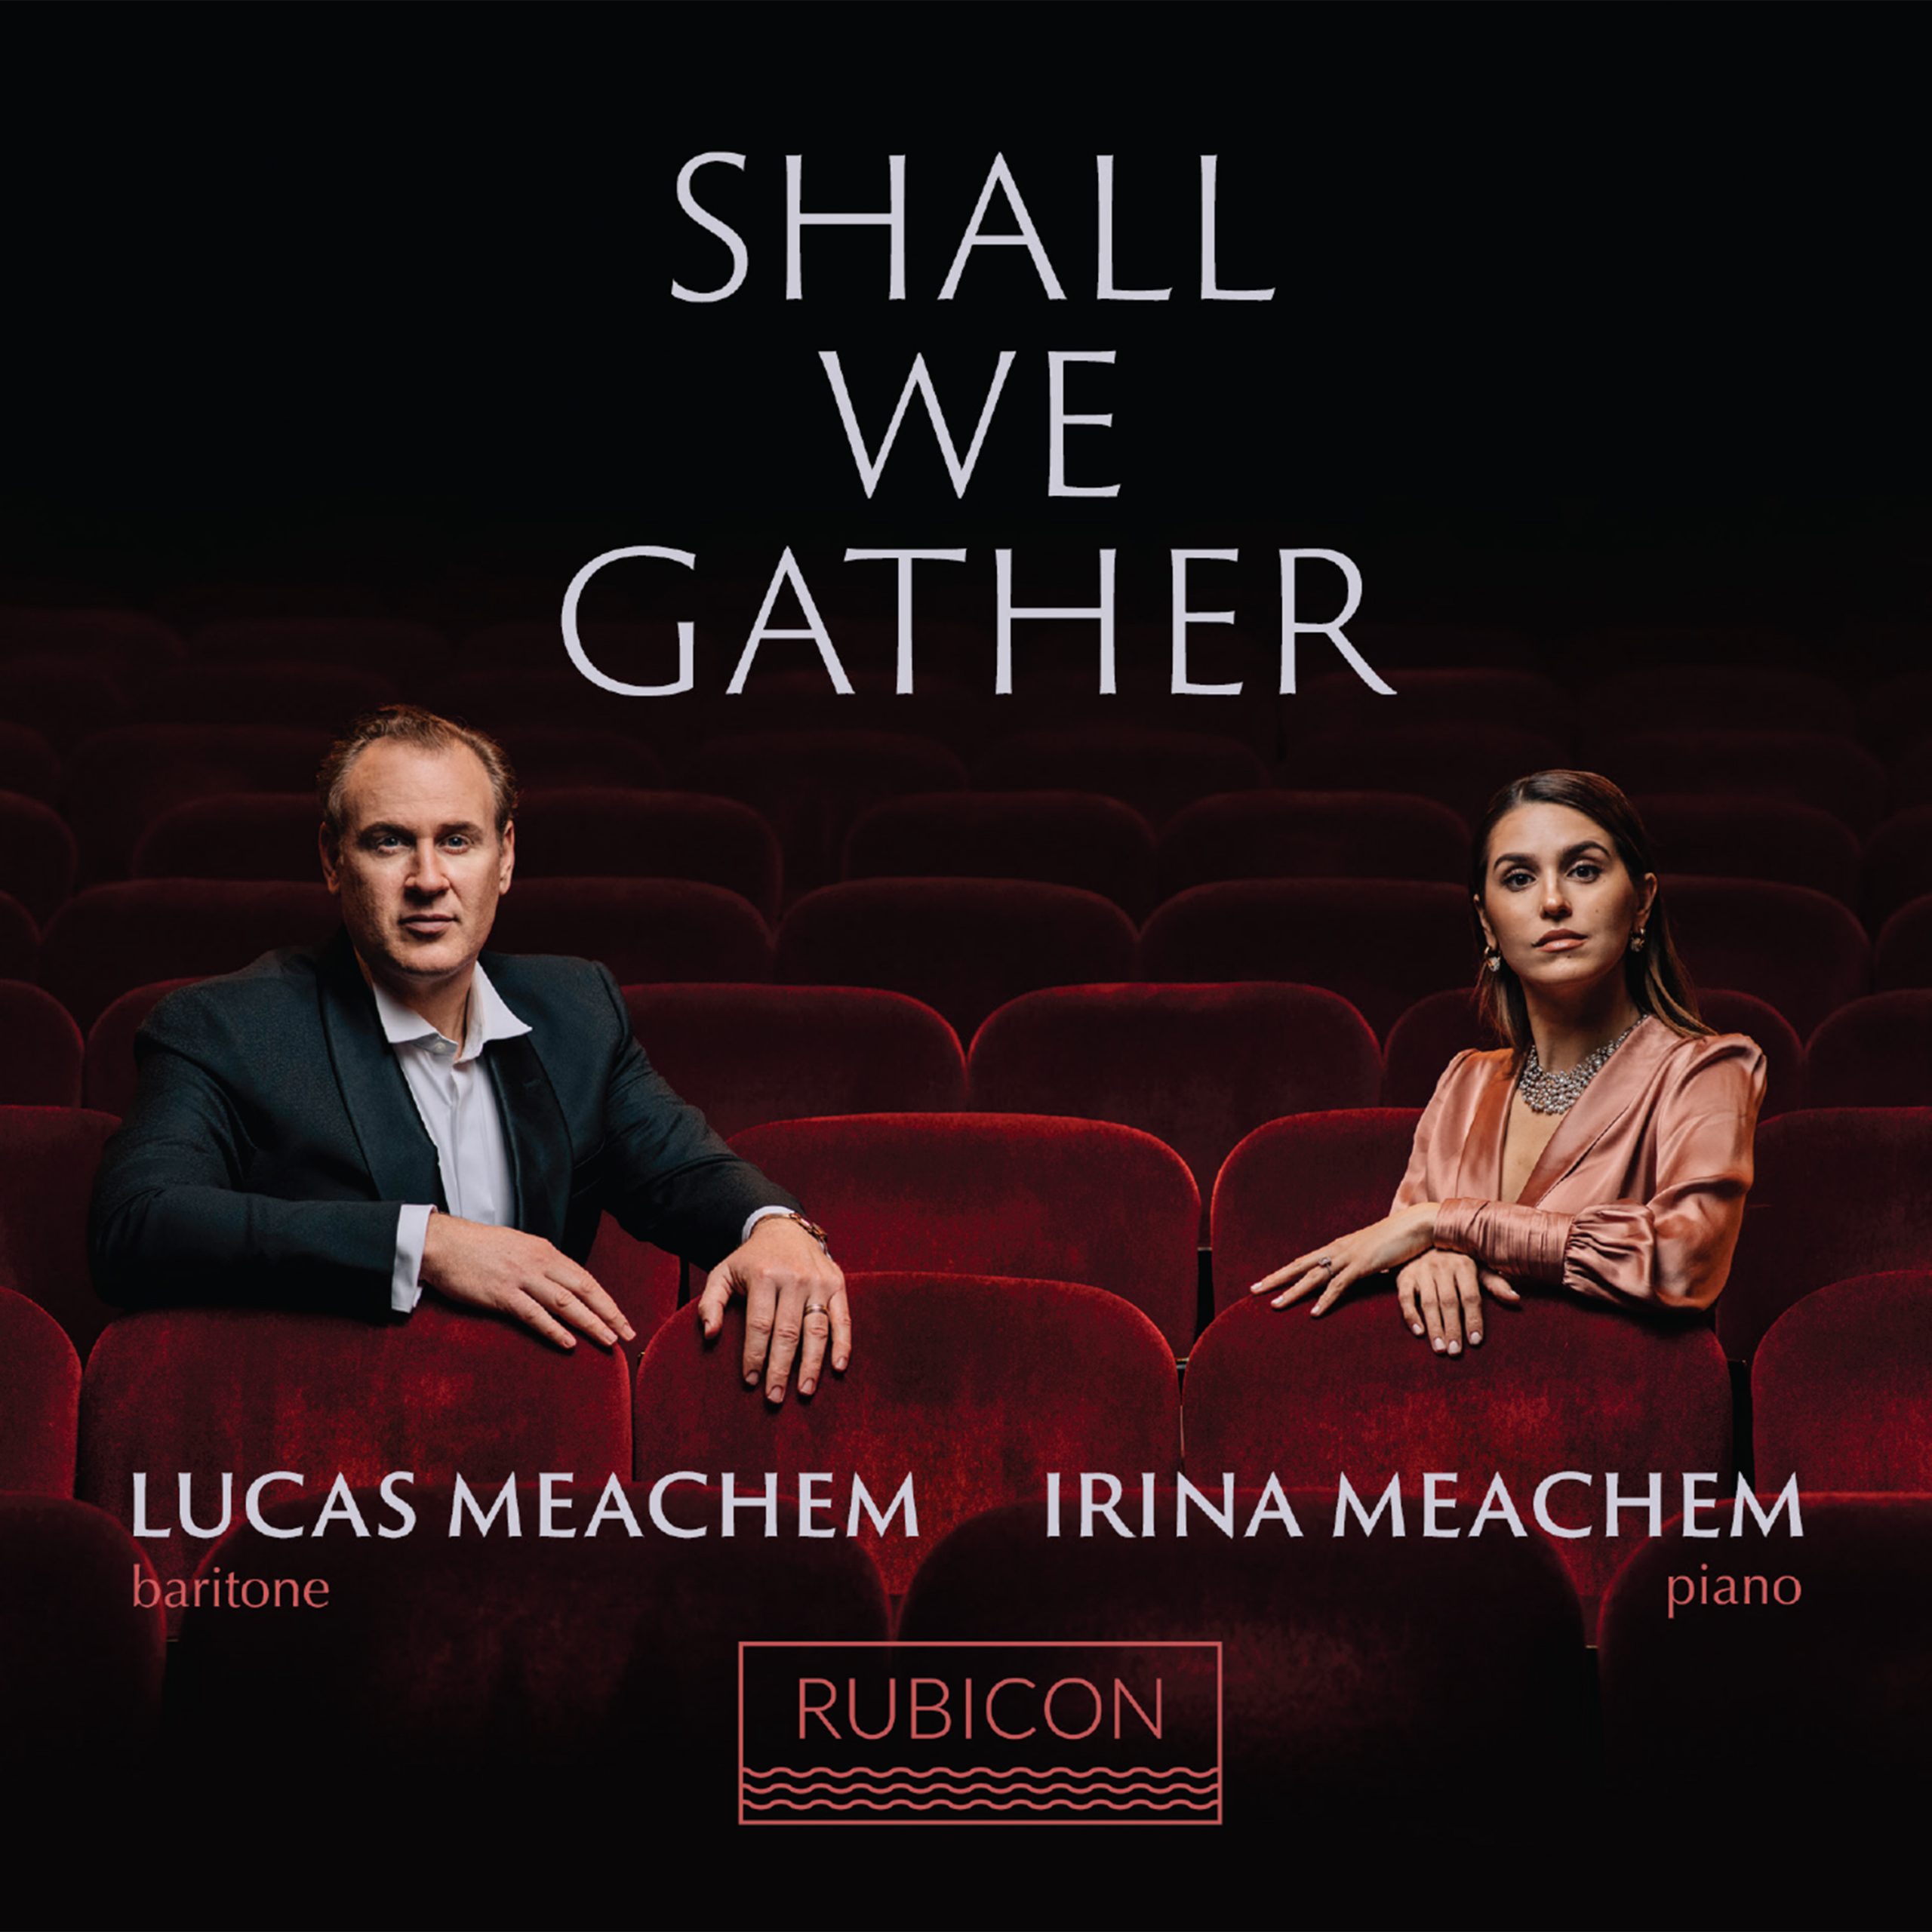 Shall We Gather, solo album by Lucas Meachem, showing Lucas and Irina Meachem sitting in a dark theatre.